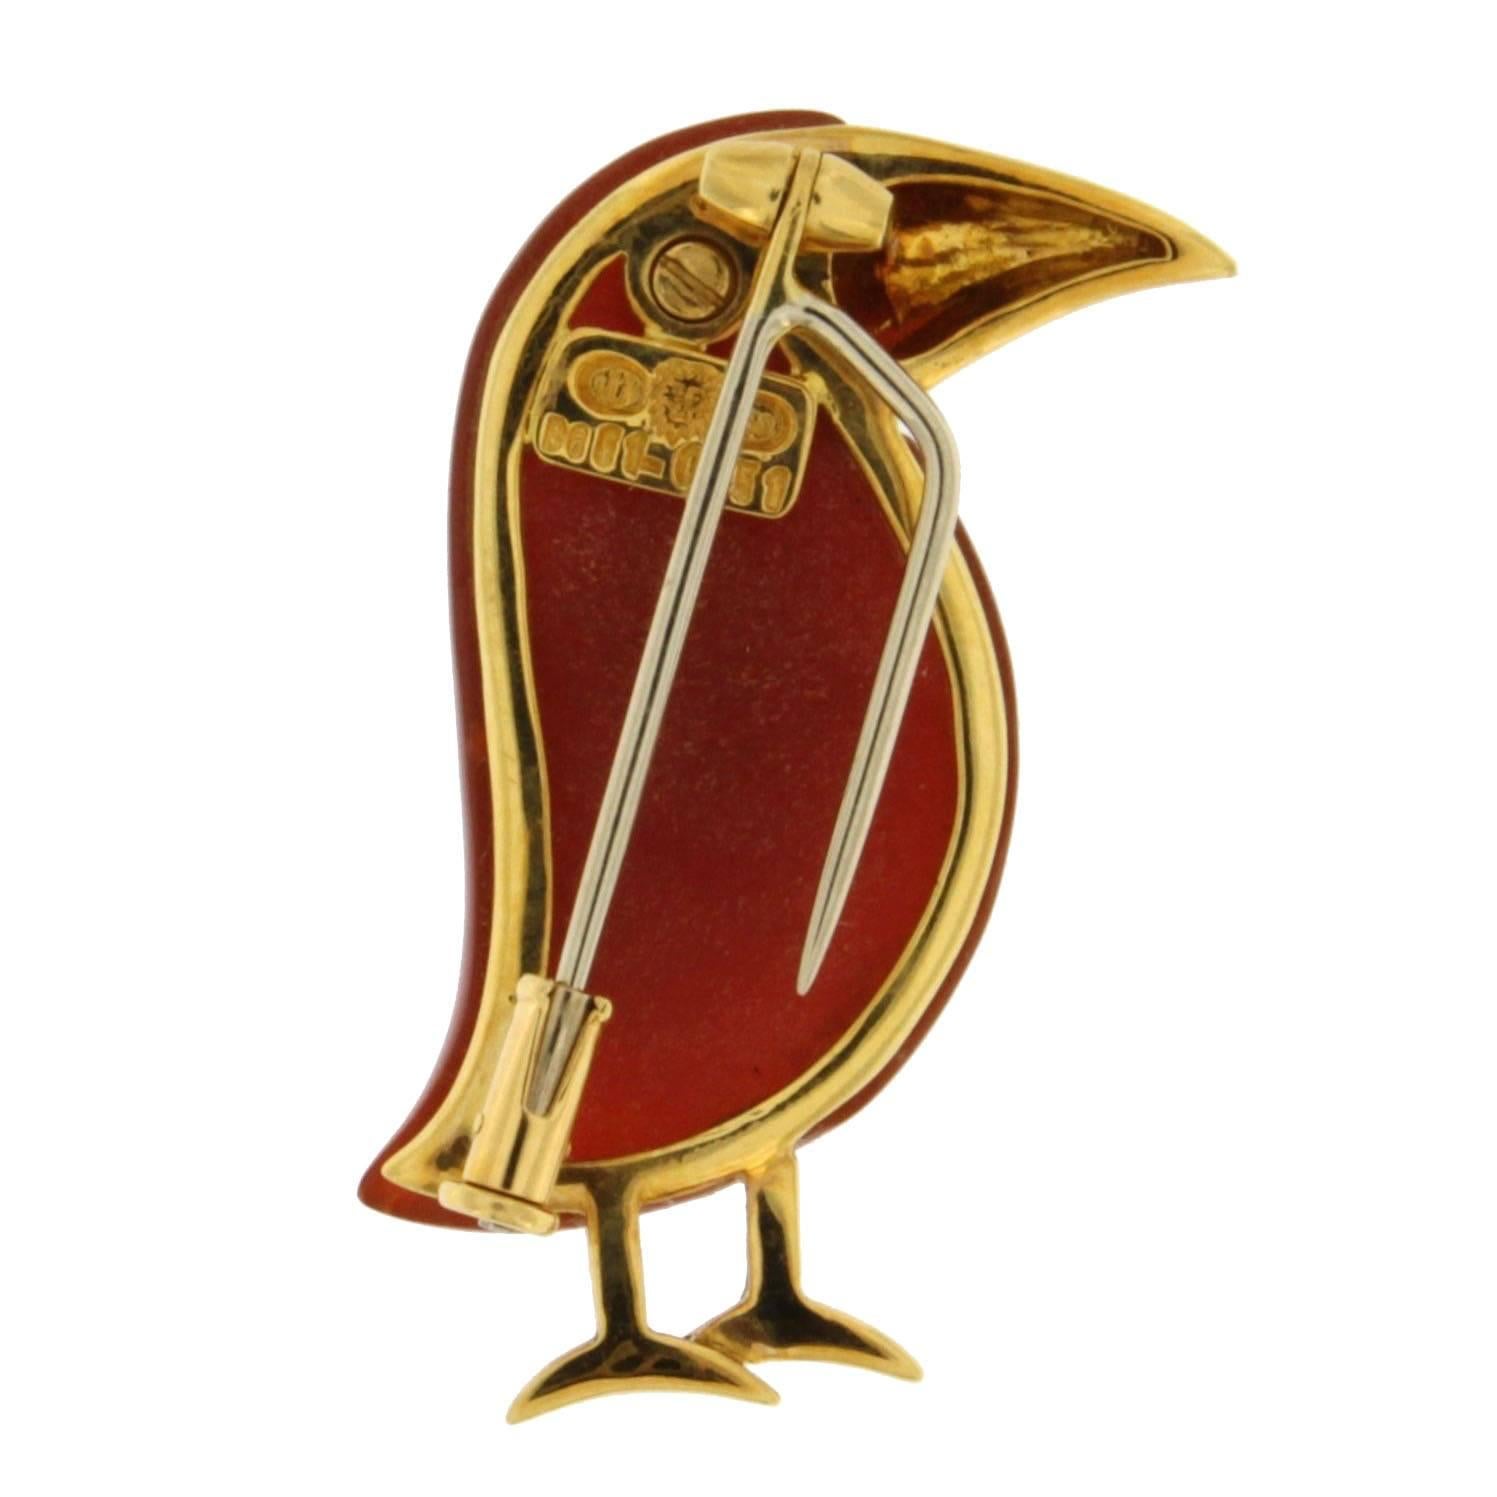 Jona design collection, 18 karat yellow gold toucan brooch, set with a carnelian body and a white diamond eye.  All Jona jewelry is new and has never been previously owned or worn. Each item will arrive at your door beautifully gift wrapped in Jona